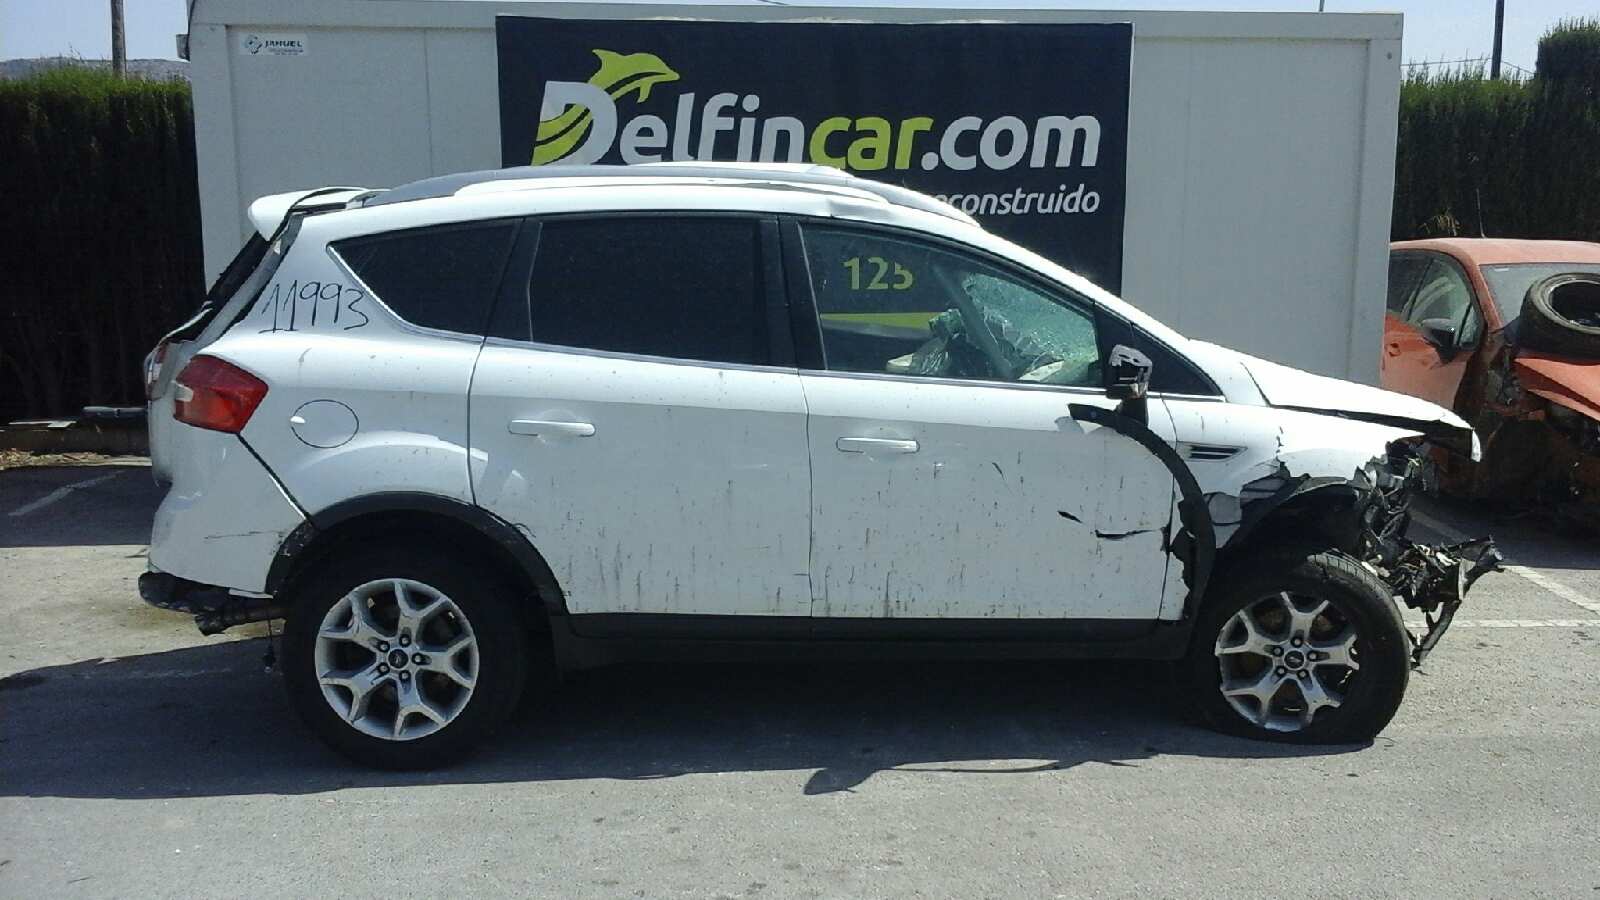 FORD Kuga 2 generation (2013-2020) Rear left door window lifter 8V41S264A27AD, 7M51R24995DB, ELECTRICO 18626378